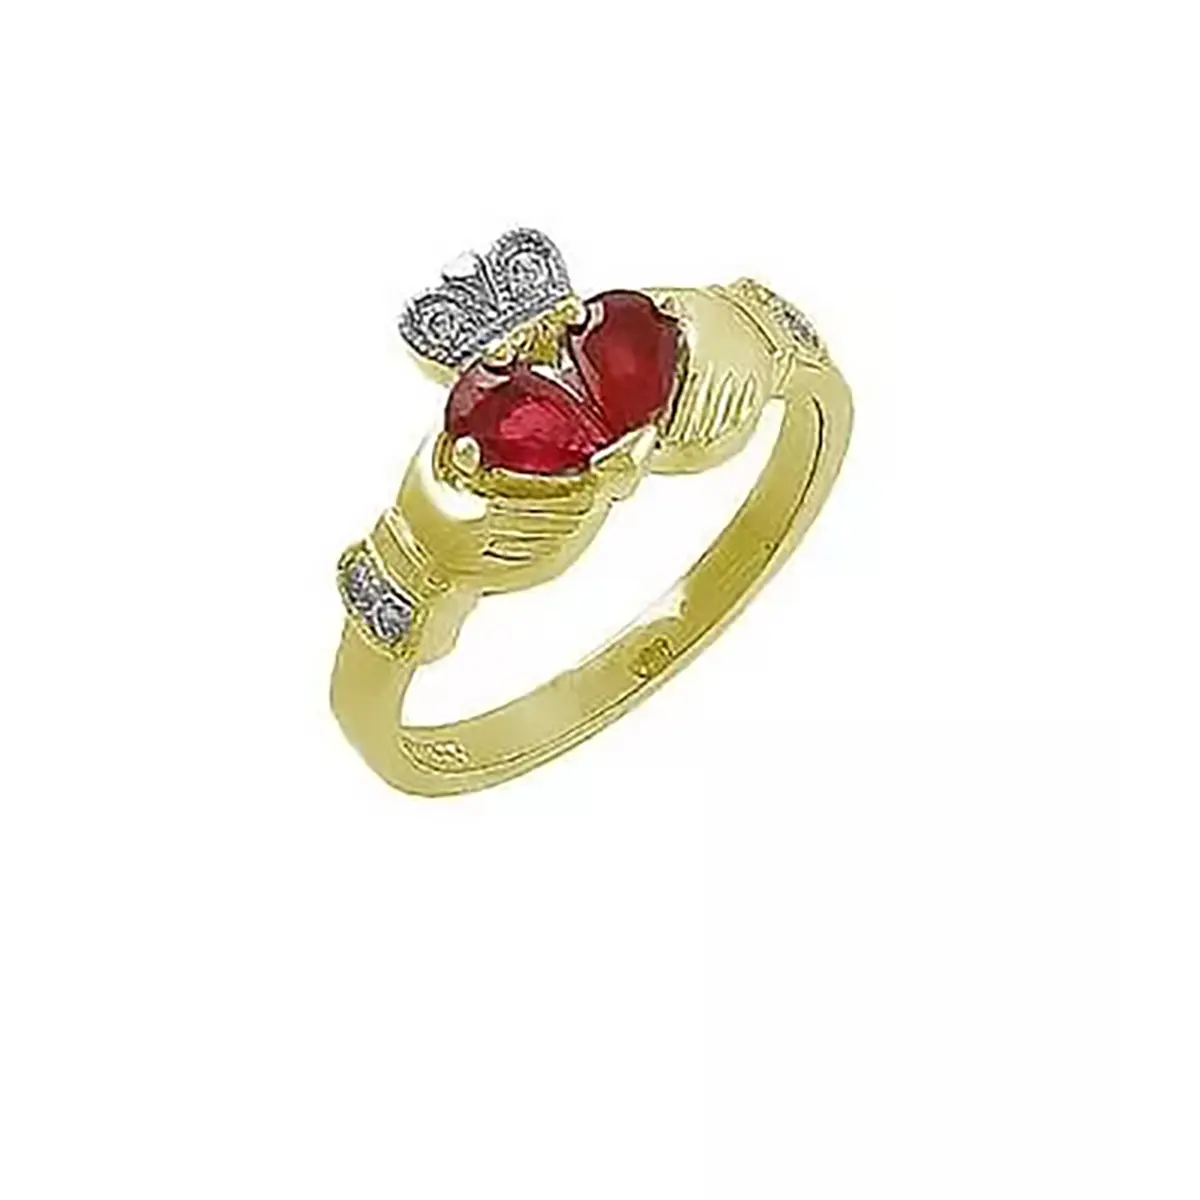 1_claddagh Ring With Ruby Stone